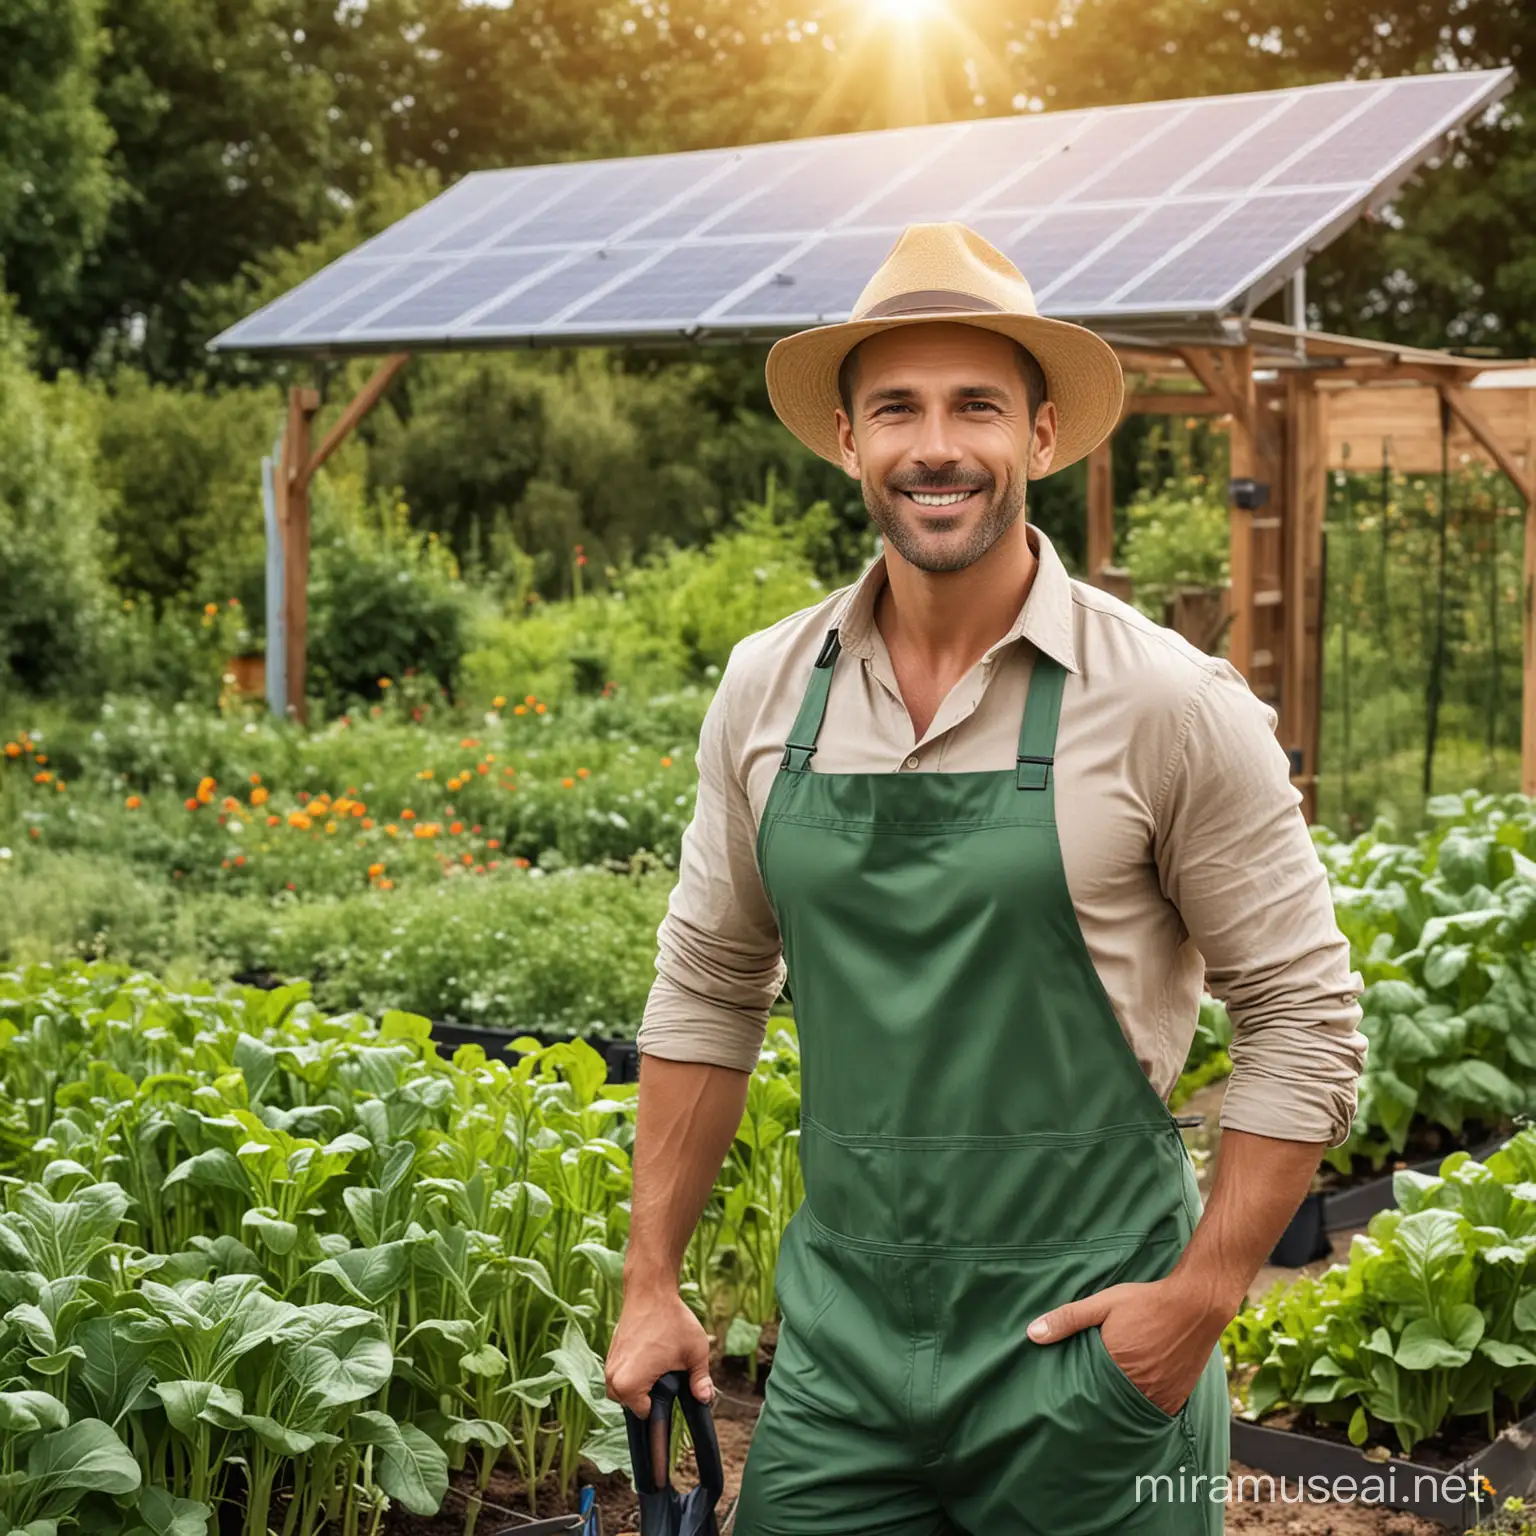 a handsome man in gardening clothes on his background is Solar-Powered vegetable Garden